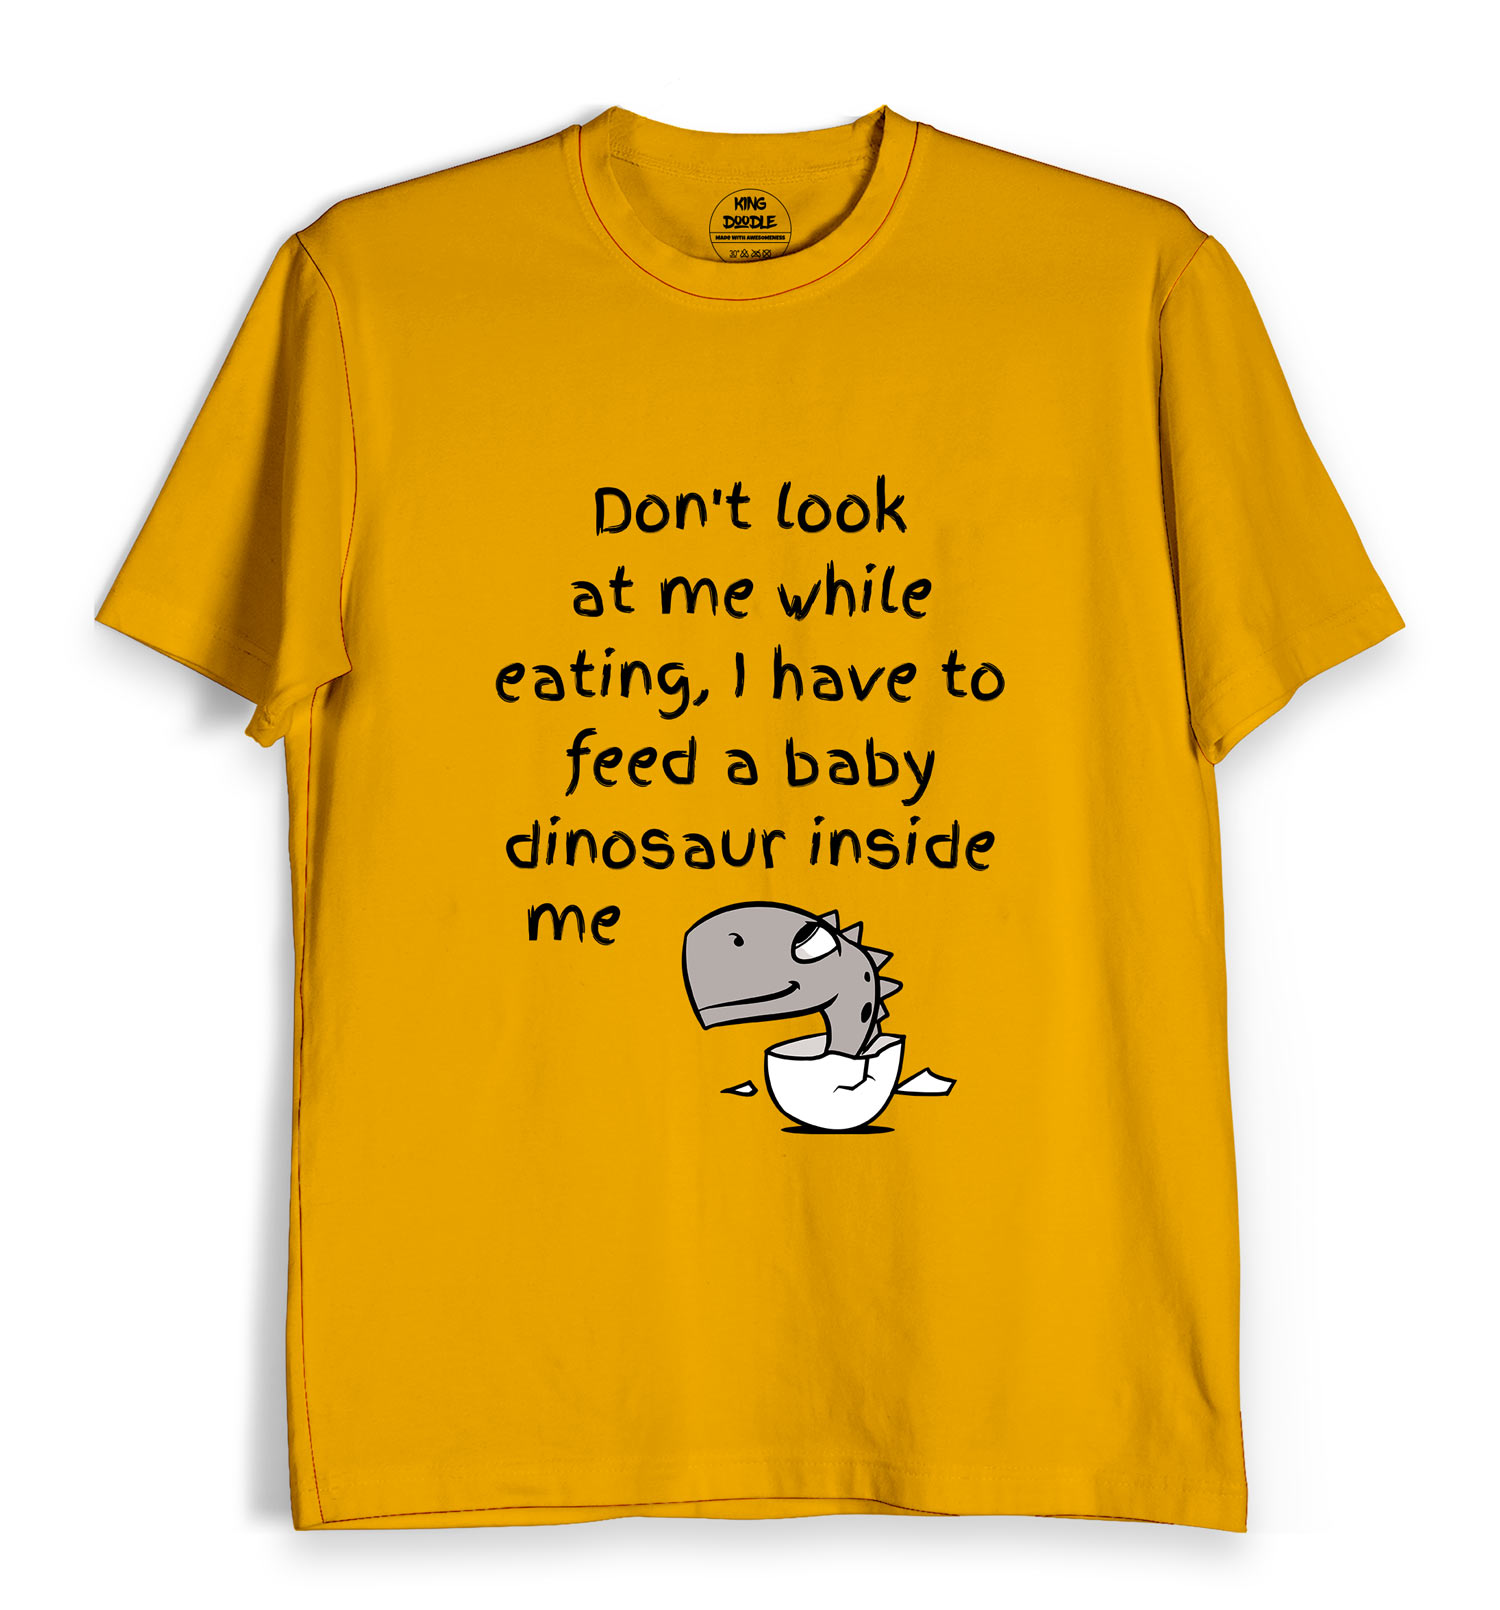 foodie t shirts india